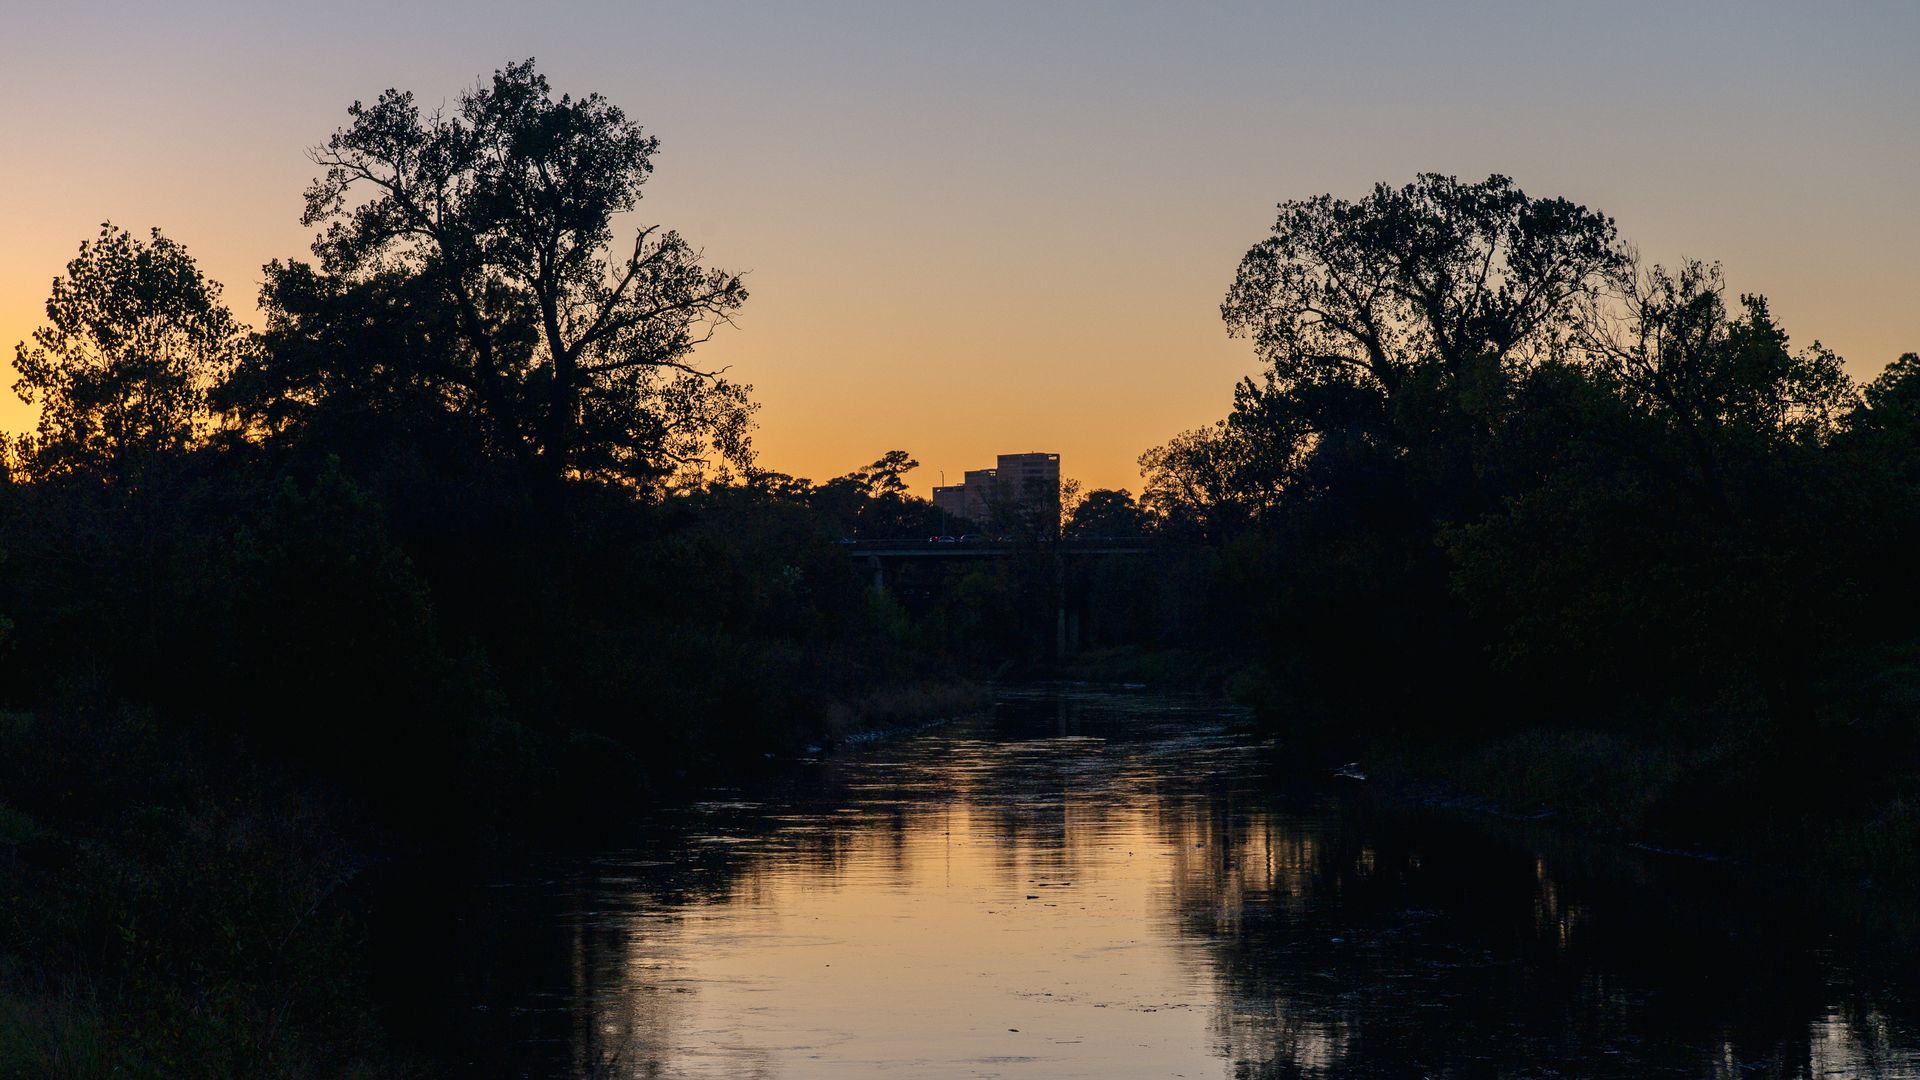 The Buffalo Bayou is seen at sunset in Houston, Texas.